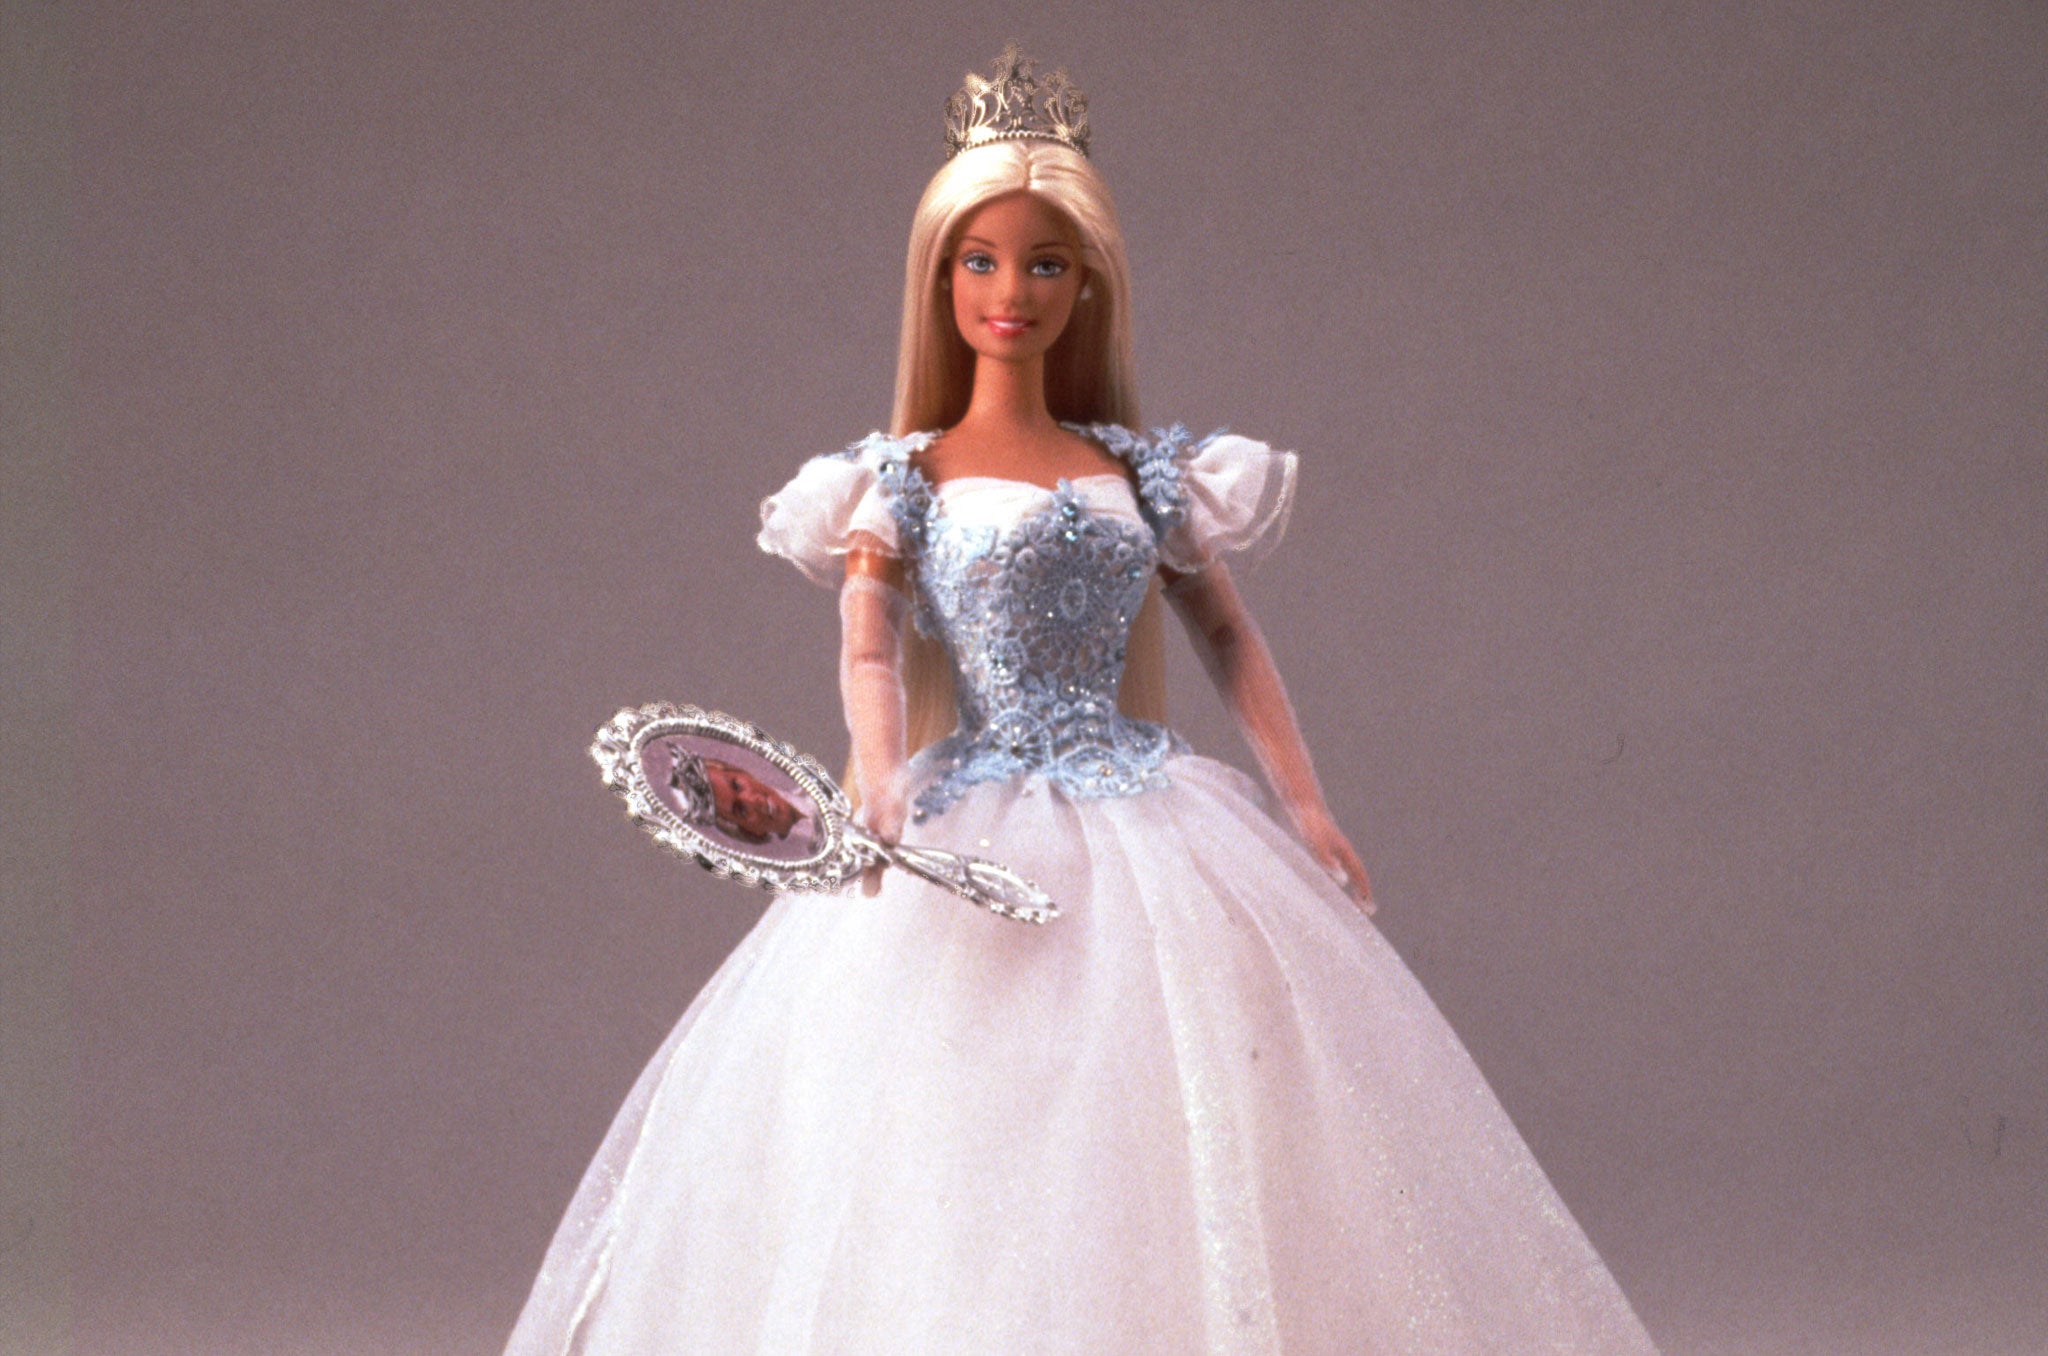 Princess Bride Barbie is a fairytale princess. Once she raises her magical mirror to see Prince Ken, music plays, telling her and girls she has found her true love.